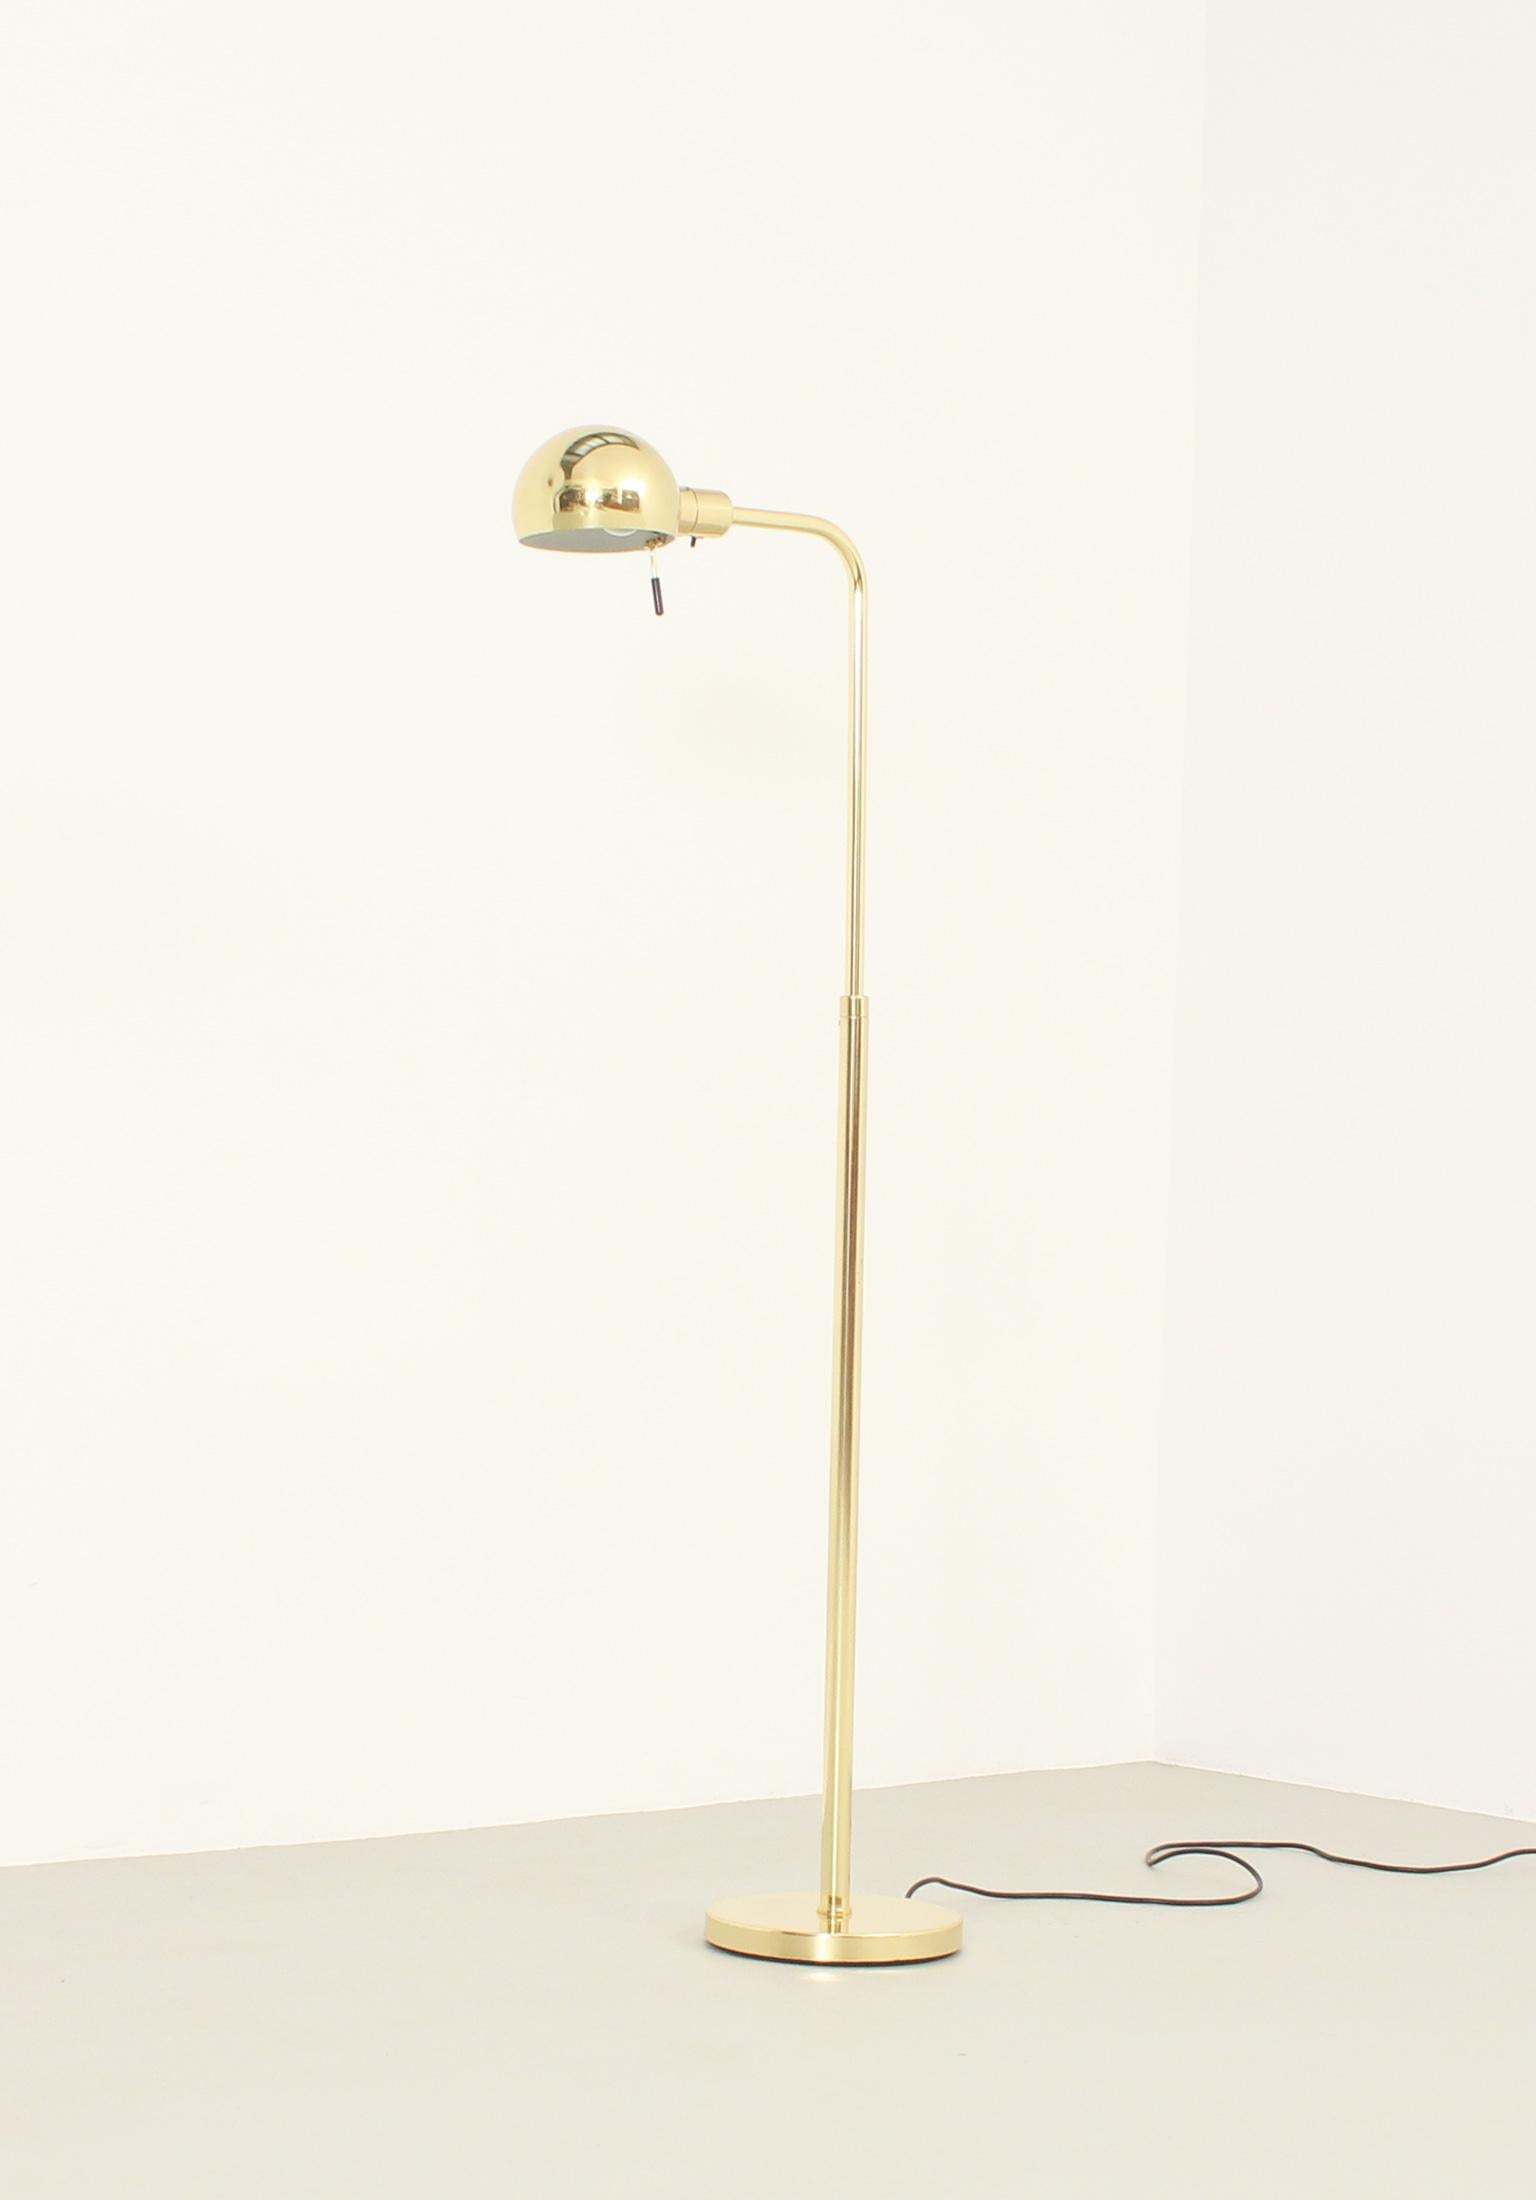 Adjustable floor lamp designed in 1970's by George Hansen and produced by Metalarte, Spain. Brass and lacquered metal. Adjustable in height from 104 to 140 cm, the arm is rotatable.